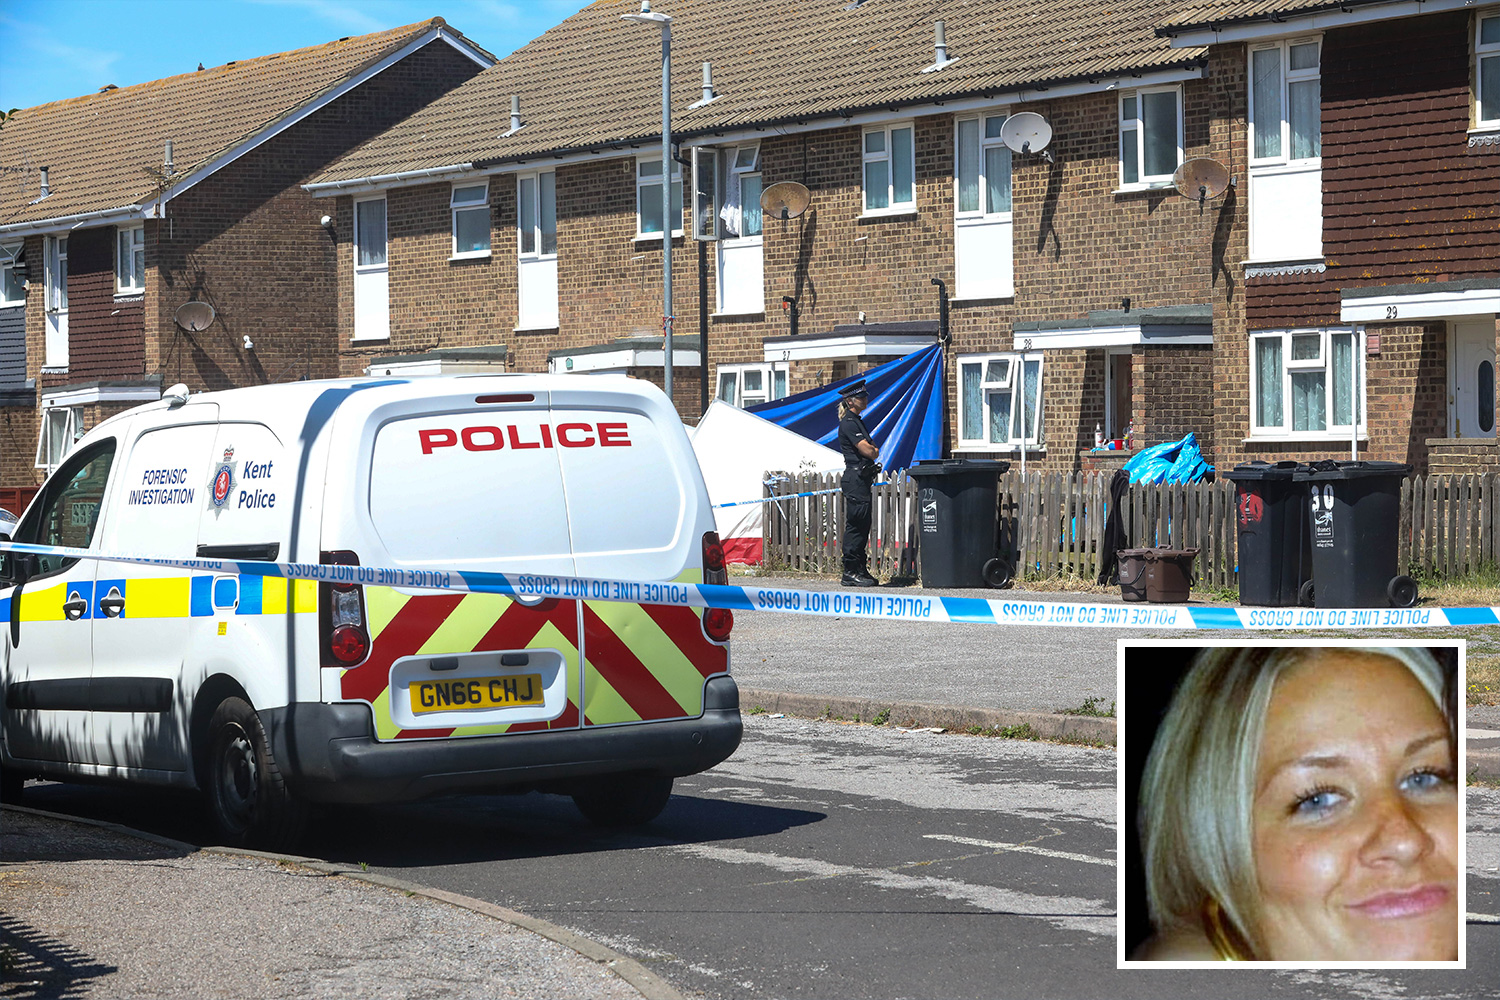 Mother-of-three is’stabbed to death at her home’, as man and woman are taken into police custody for’murder.’